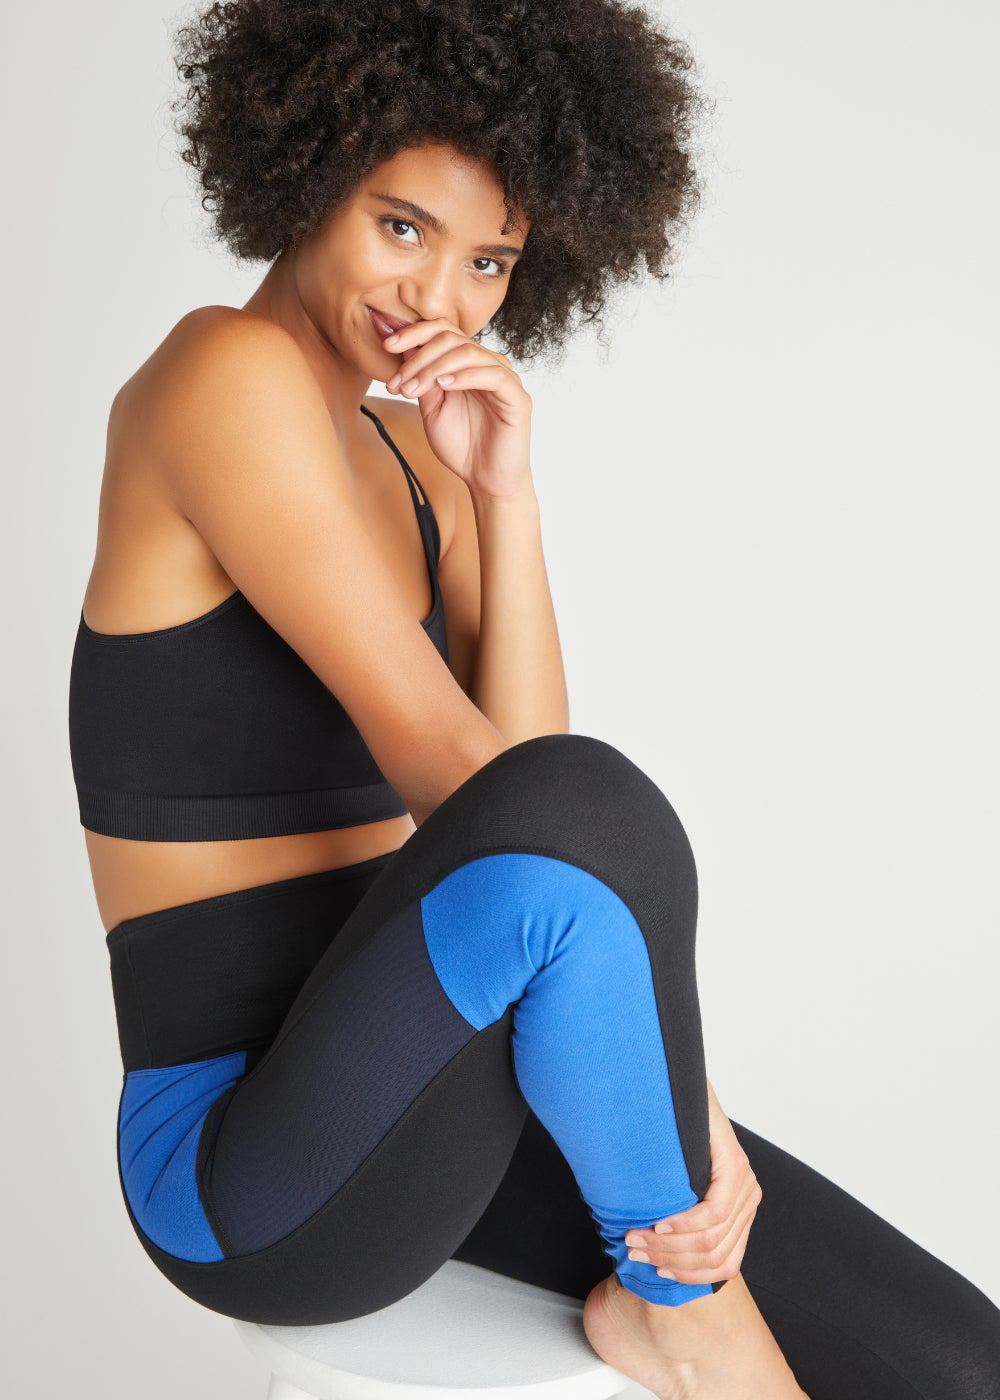 Rachel Shaping Legging with Mesh Pockets - Cotton Stretch from Yummie in Black/True Sapphire Stripe  - 1